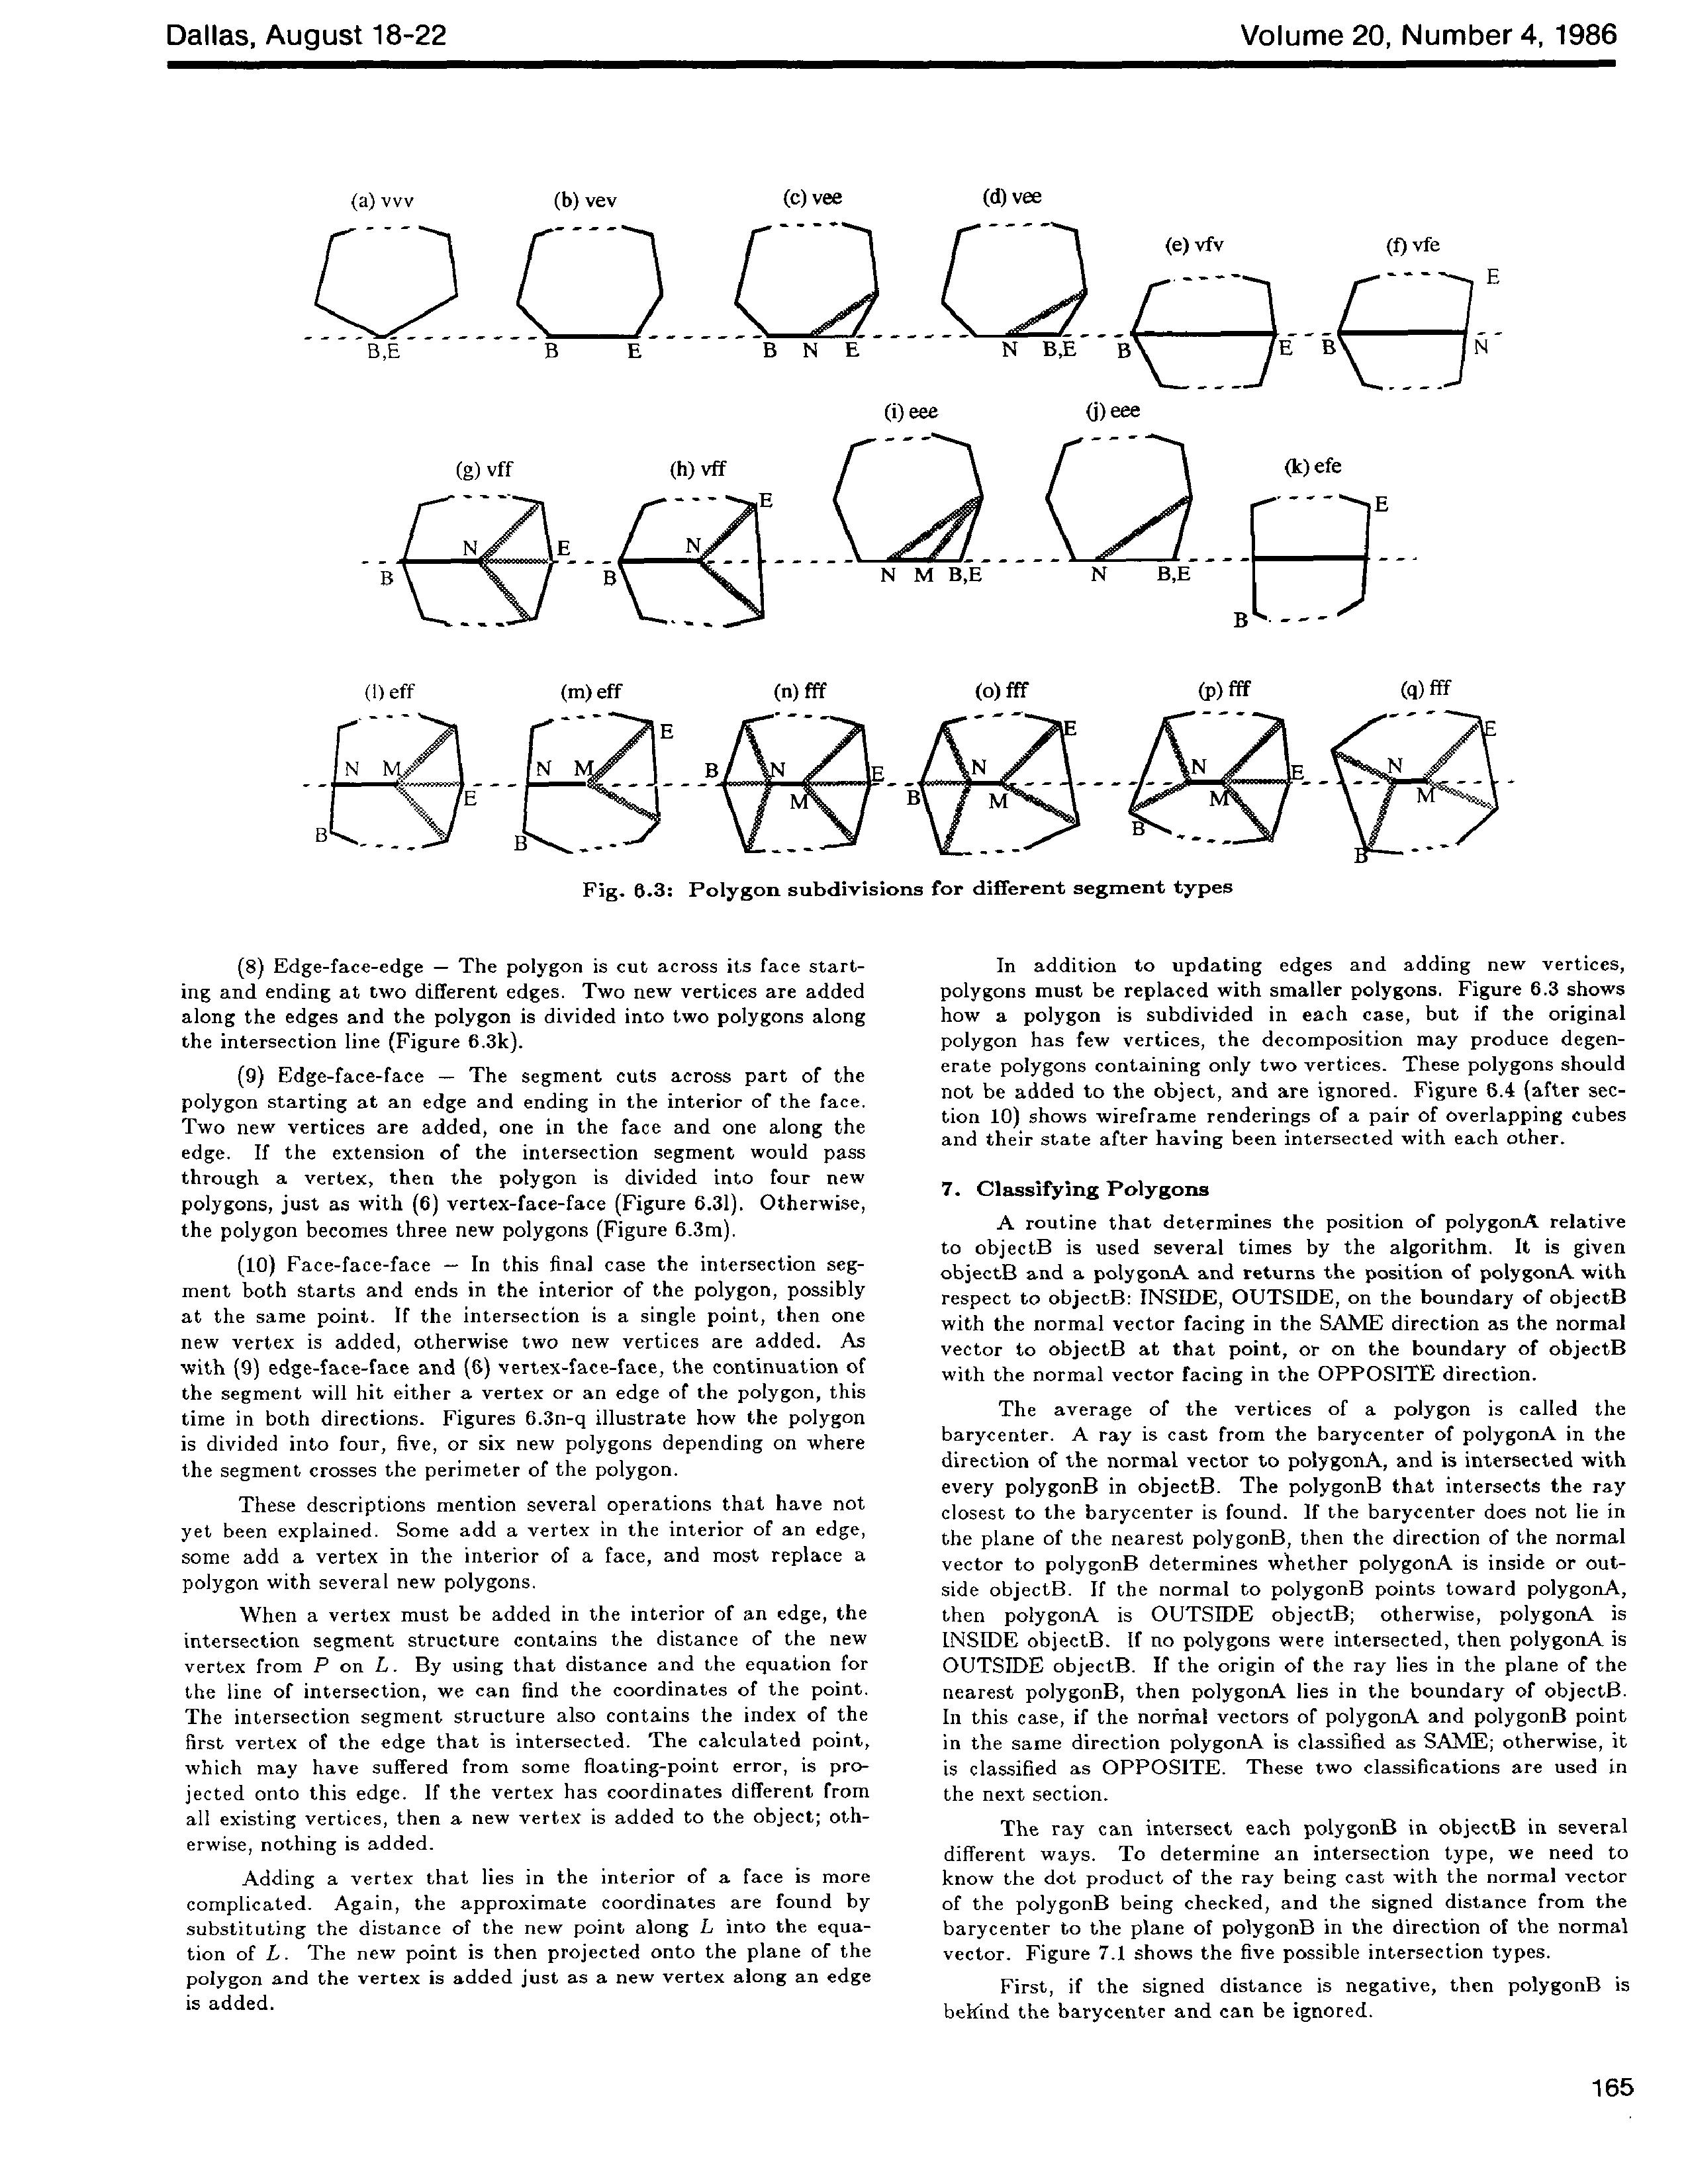 Constructive Solid Geometry for Polyhedral Objects